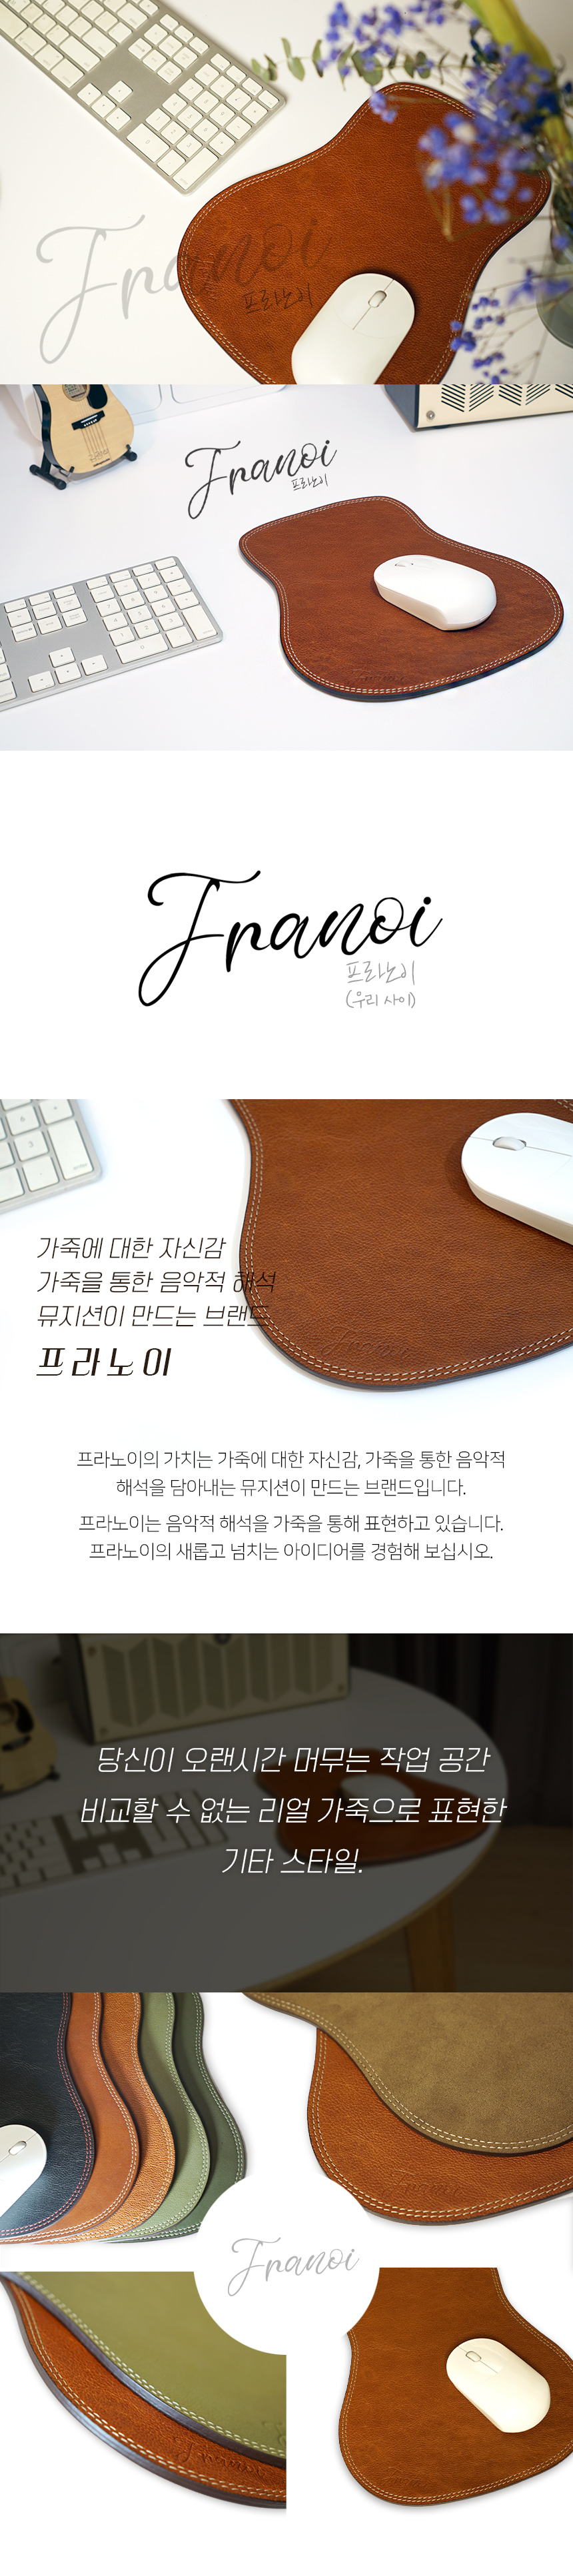 franoi_mouse_pad_brown_01_133341.jpg